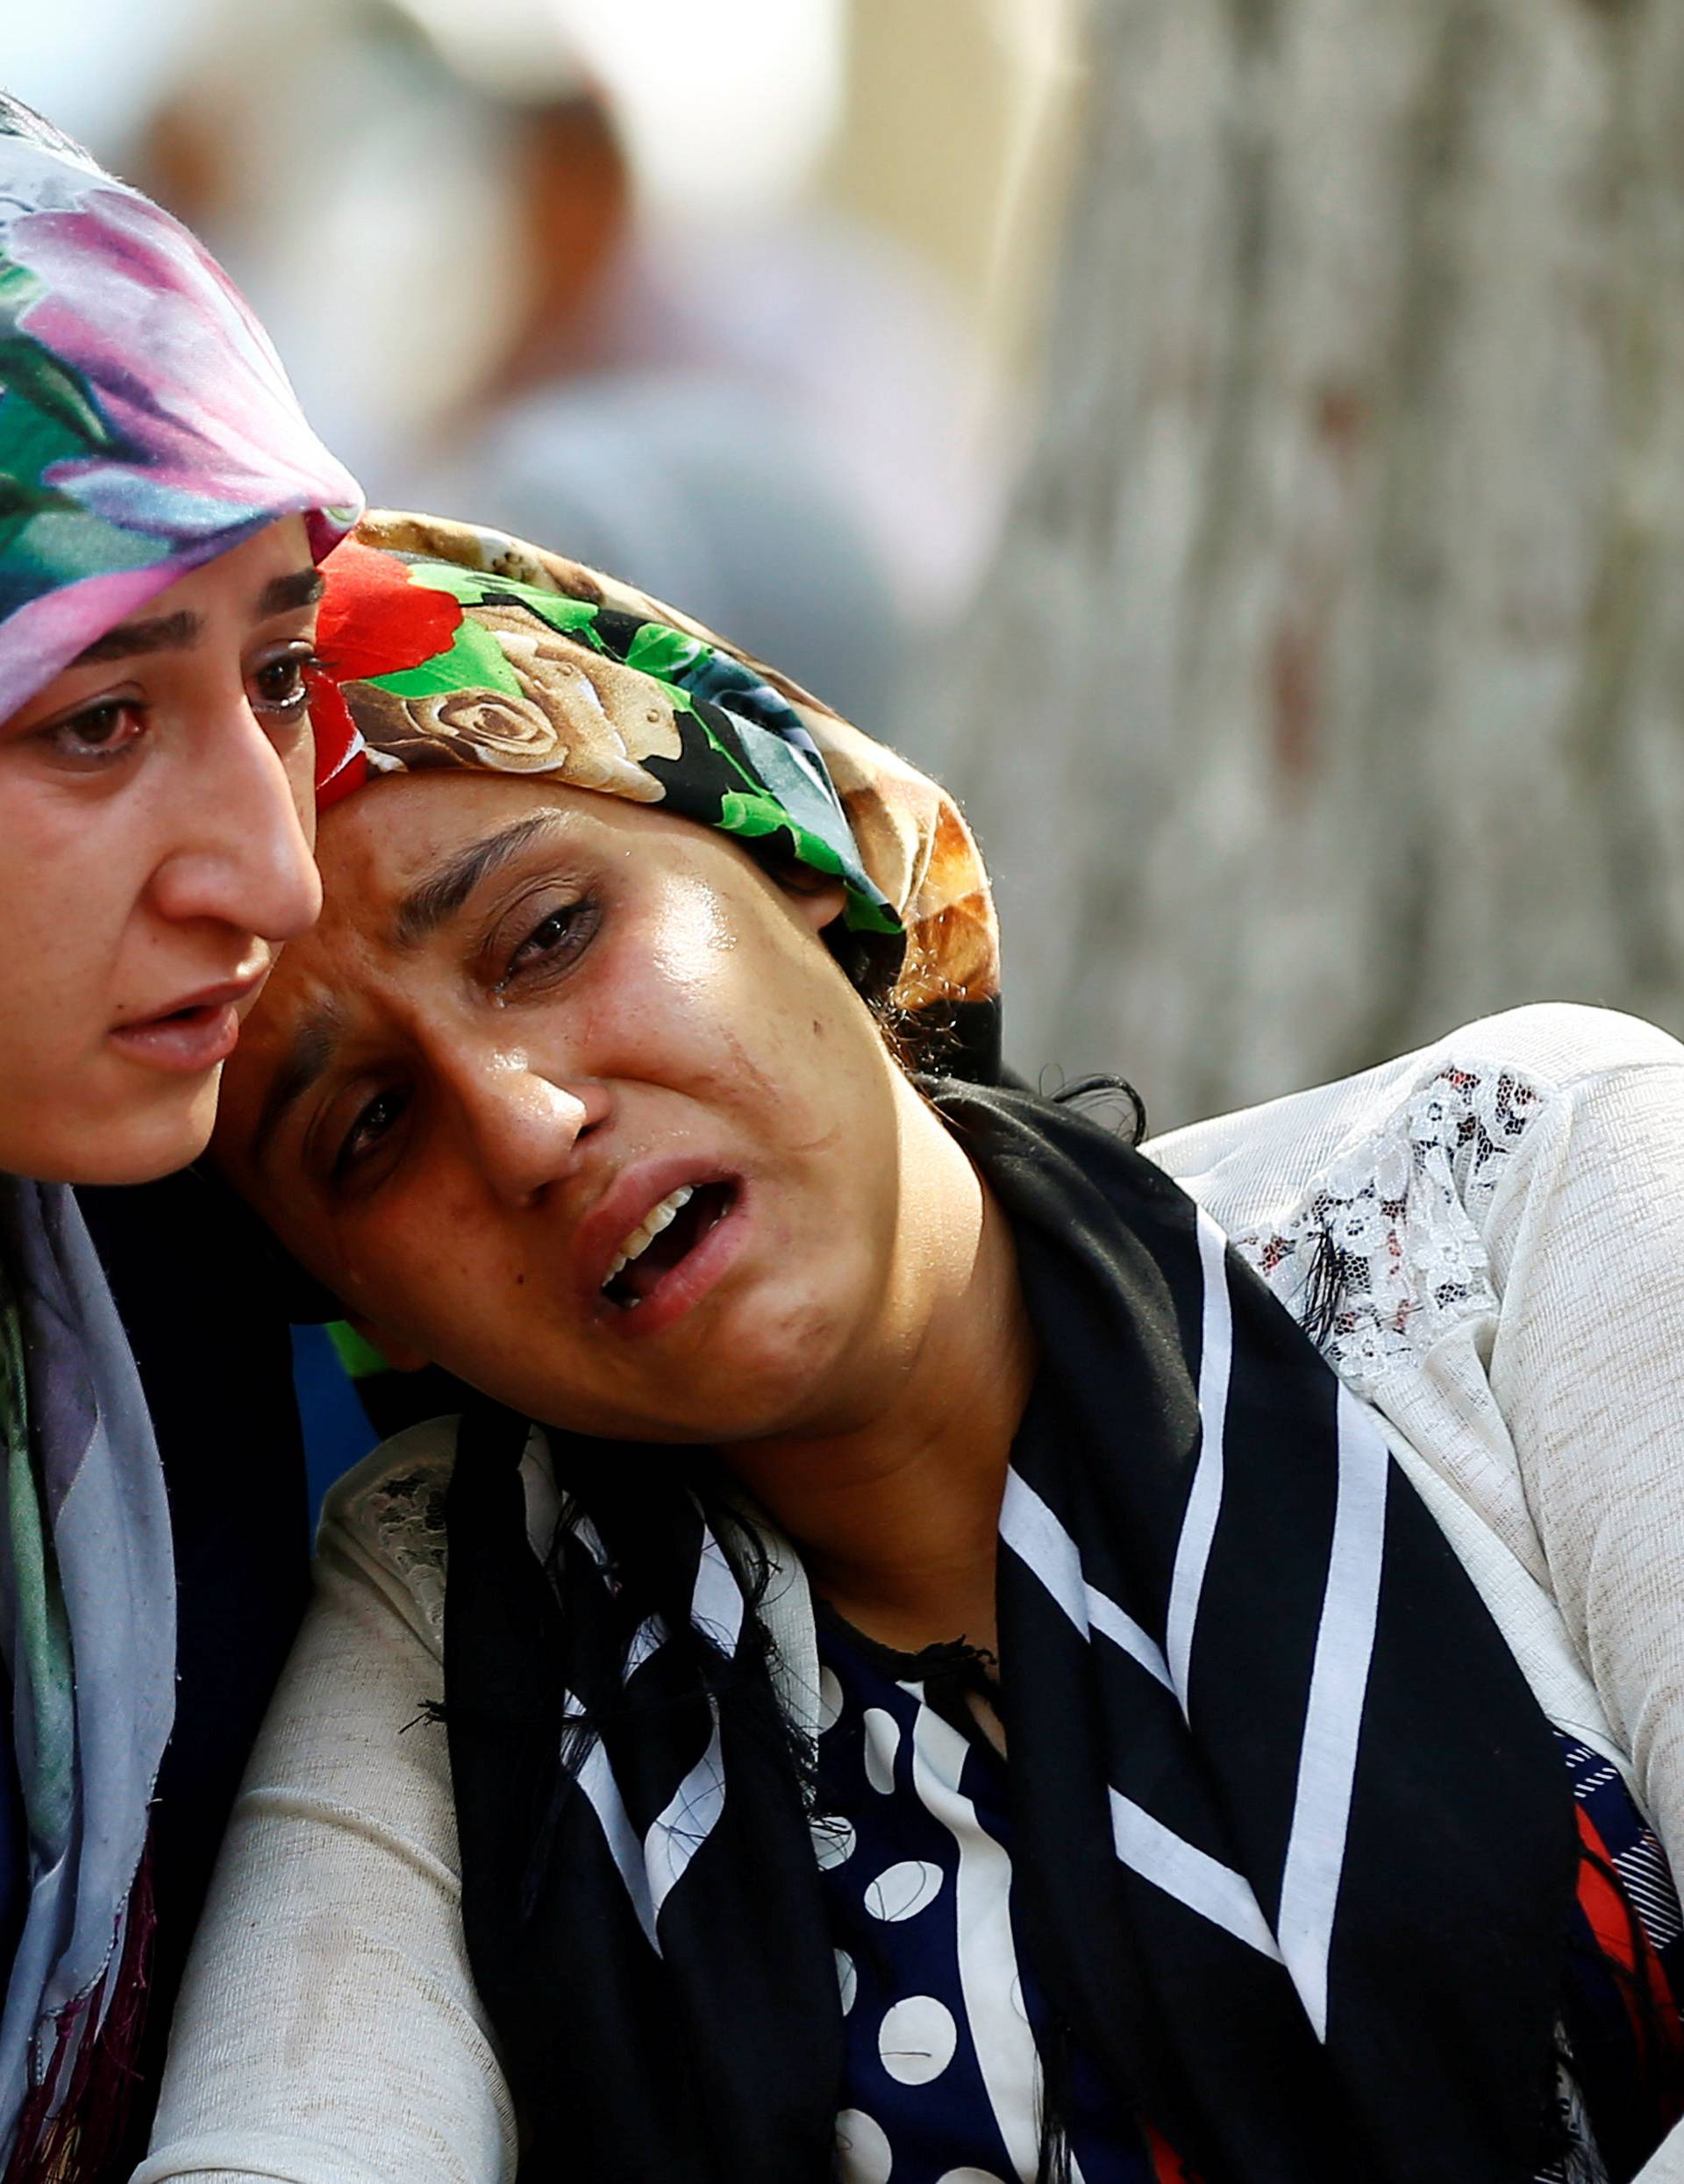 Women mourn as they wait in front of a hospital morgue in the Turkish city of Gaziantep, after a suspected bomber targeted a wedding celebration in the city, Turkey